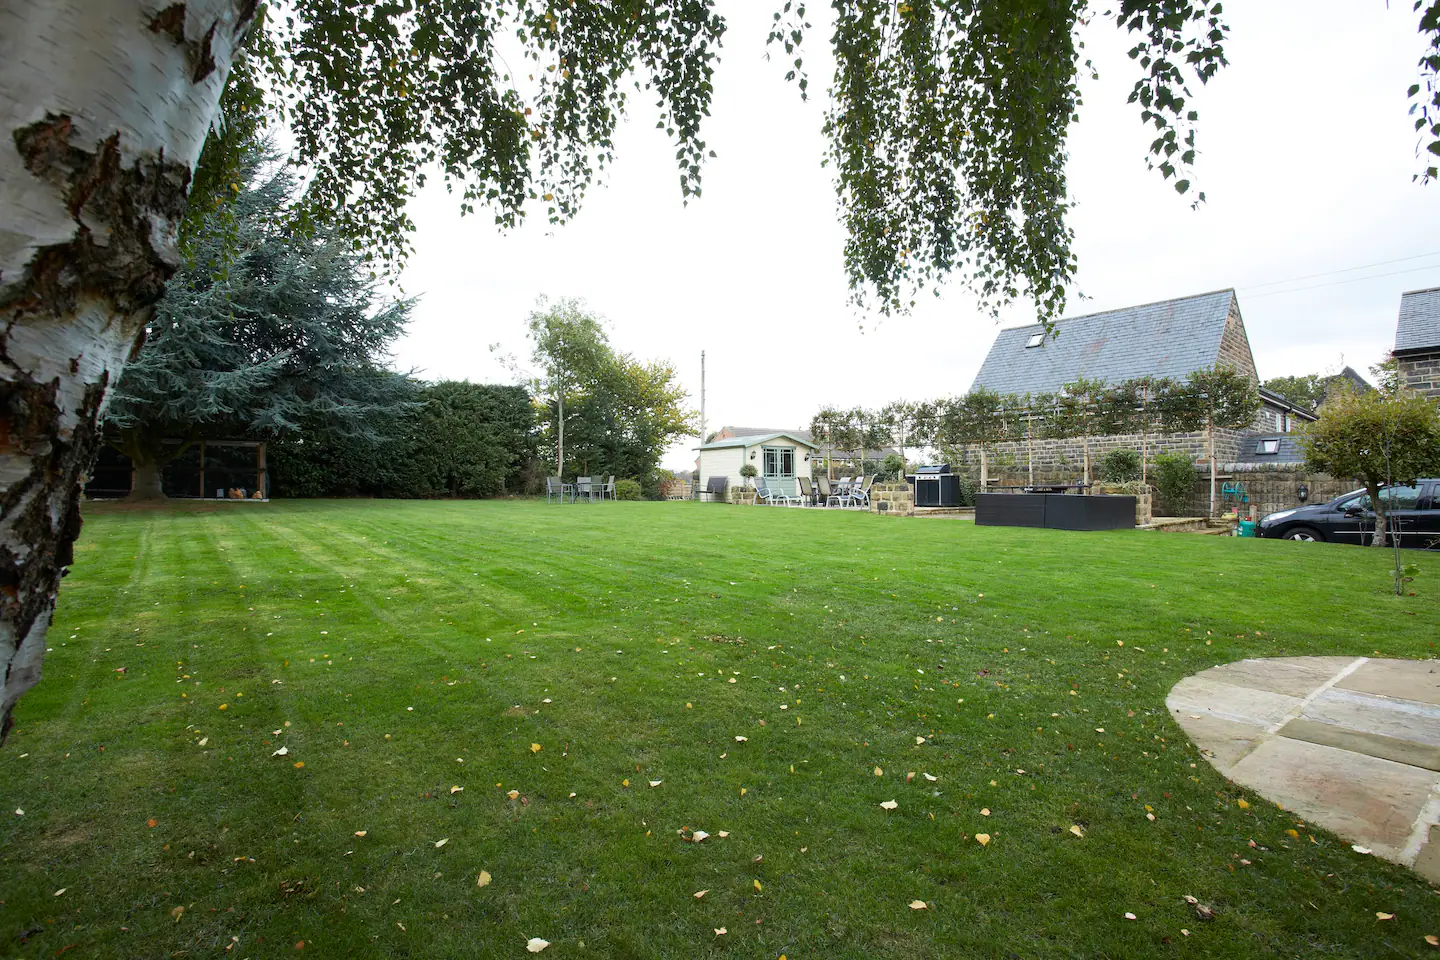 a garden with grass and circle of patio area. There is a car and a shed in the distance.